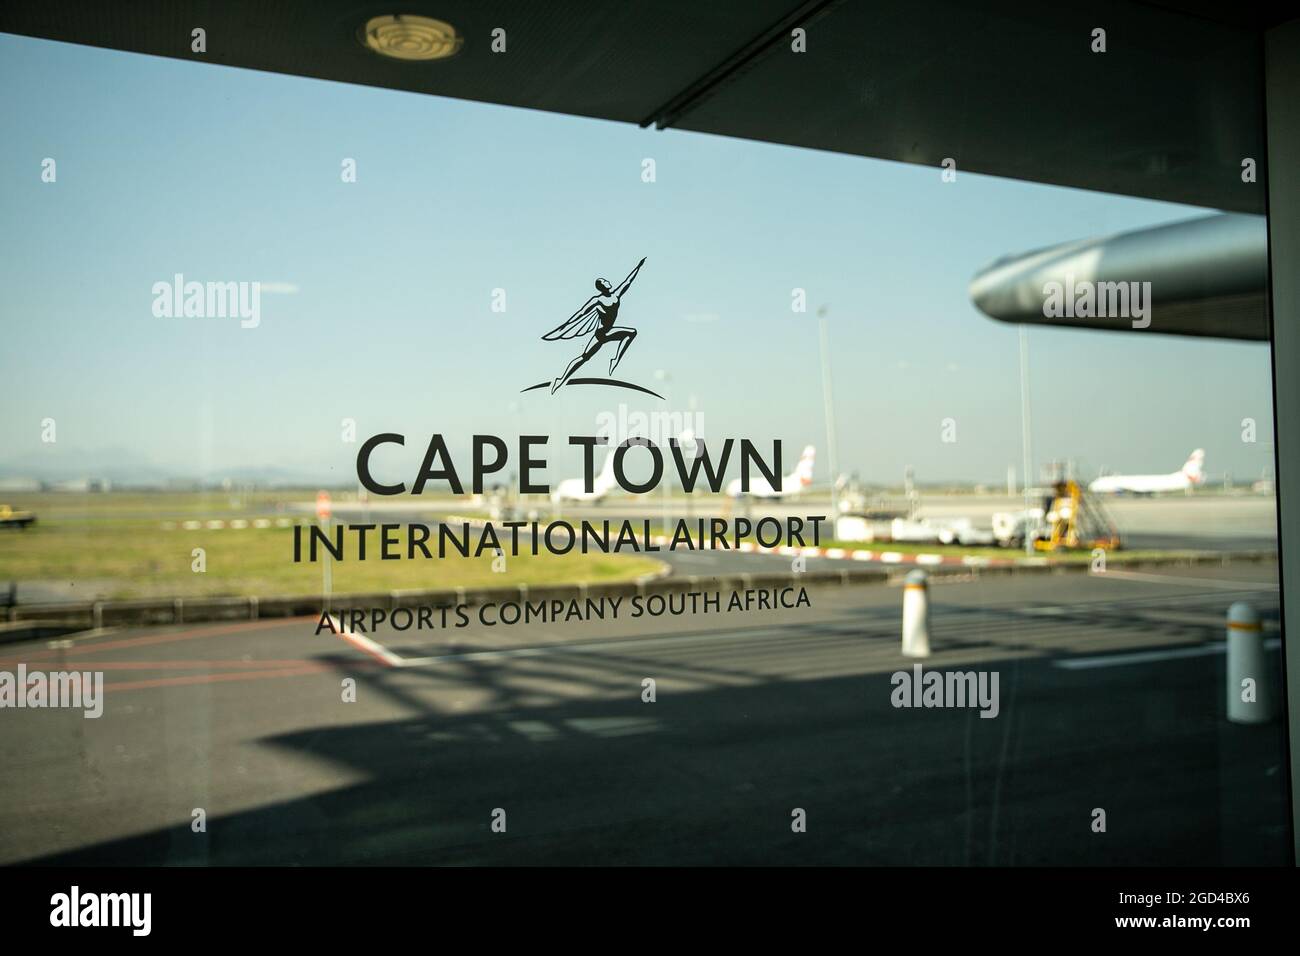 Cape Town, South Africa. 6th Aug, 2021. The logo of Cape Town International Airport is pictured on a window at Cape Town International Airport, South Africa, Aug. 6, 2021. Cape Town International Airport has won the 2021 Best Airport in Africa Award for the sixth consecutive year at the annual Skytrax World Airport Awards, the airport said Tuesday. Credit: Lyu Tianran/Xinhua/Alamy Live News Stock Photo